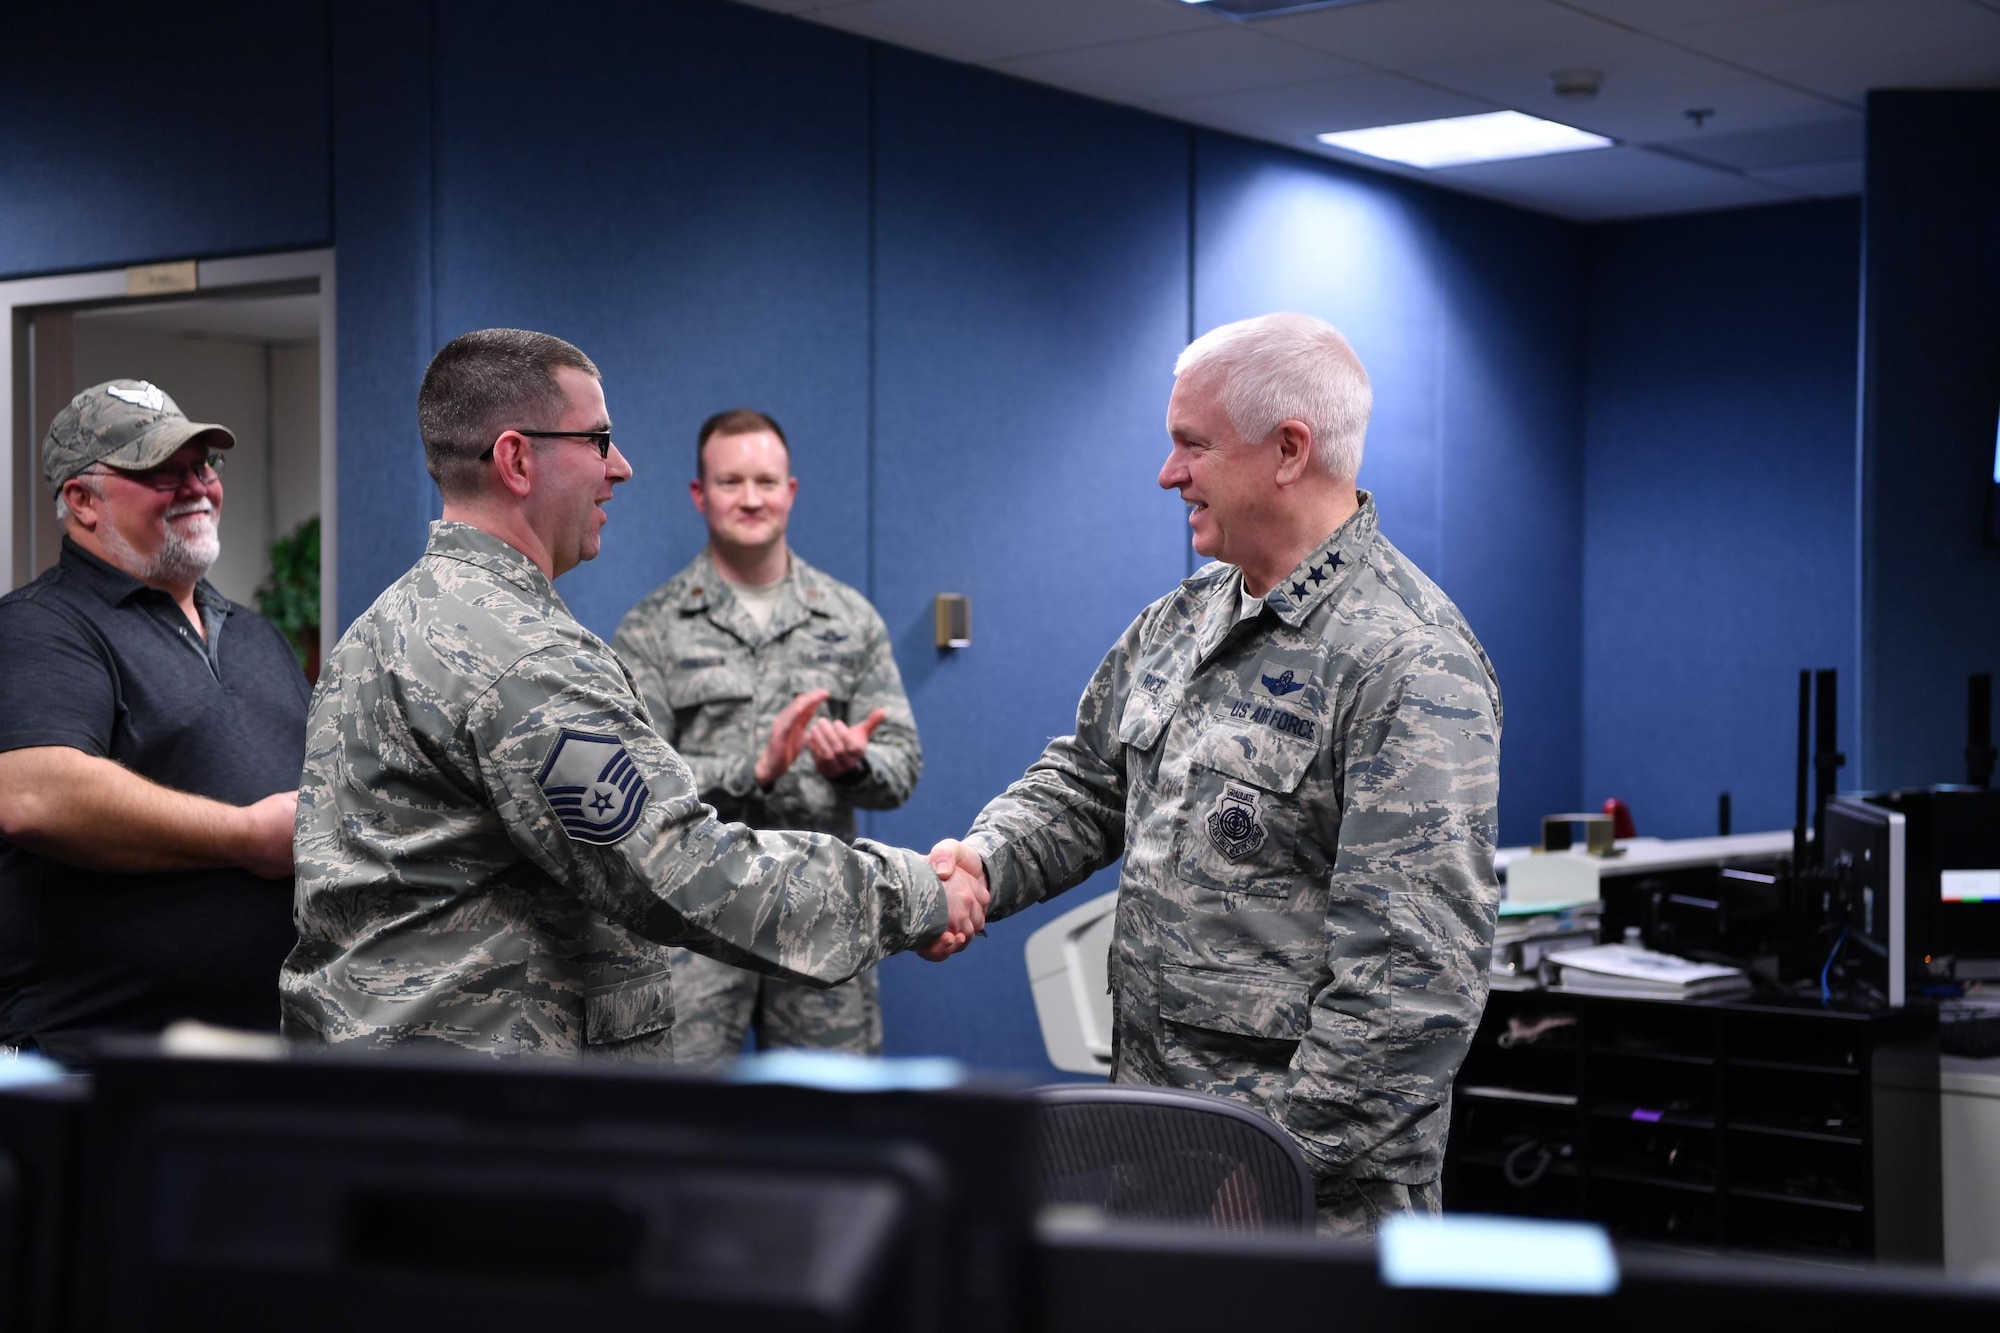 Lt. Gen. L. Scott Rice, Director of the Air National Guard, recognizes 
Master Sgt. Daniel Raile, 225th Support Squadron, for his key contributions to the maintenance and operations of the WADS' power plant.  Rice spent the day visiting two Washington Air National Guard units:  the Western Air Defense Sector at Joint Base Lewis-McChord and the 194th Wing at Camp Murray. (U.S. Air Force photo by Kimberly D. Burke)